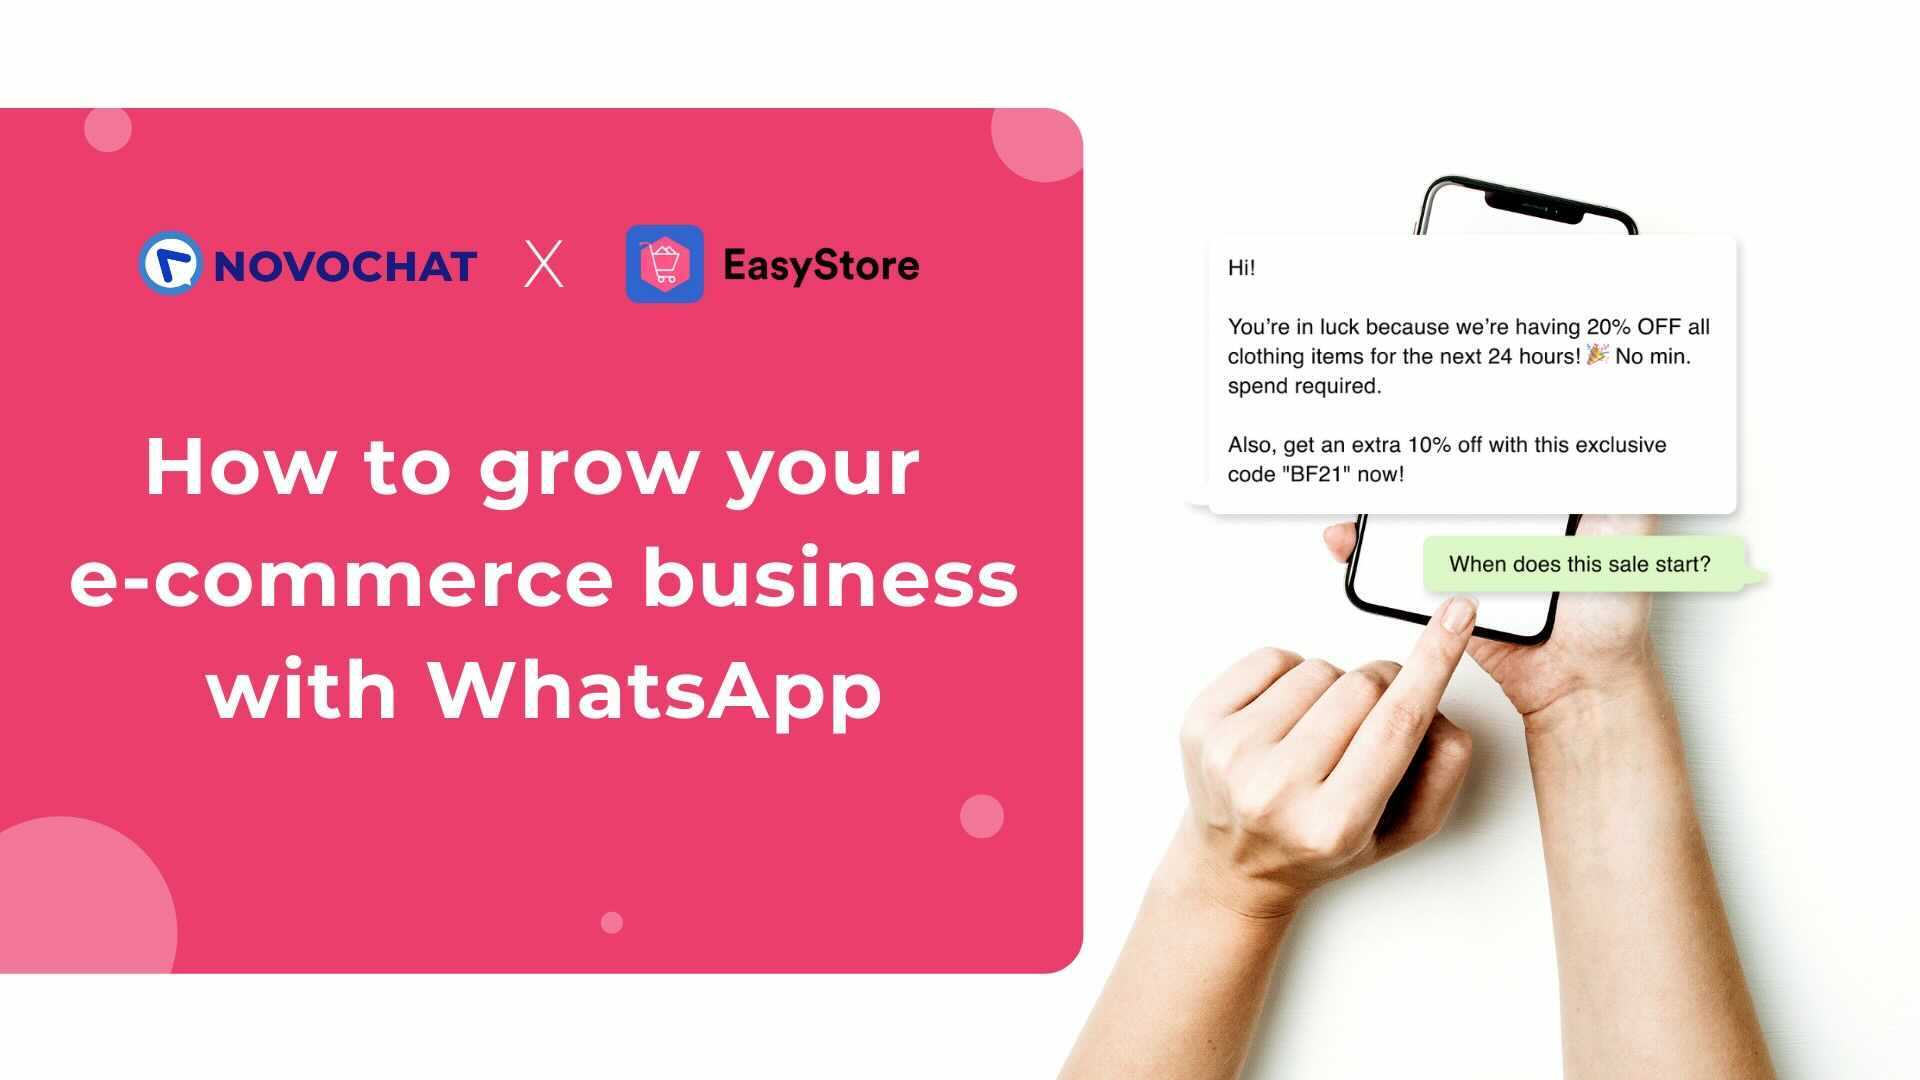 How to use WhatsApp to grow your e-commerce business | EasyStore